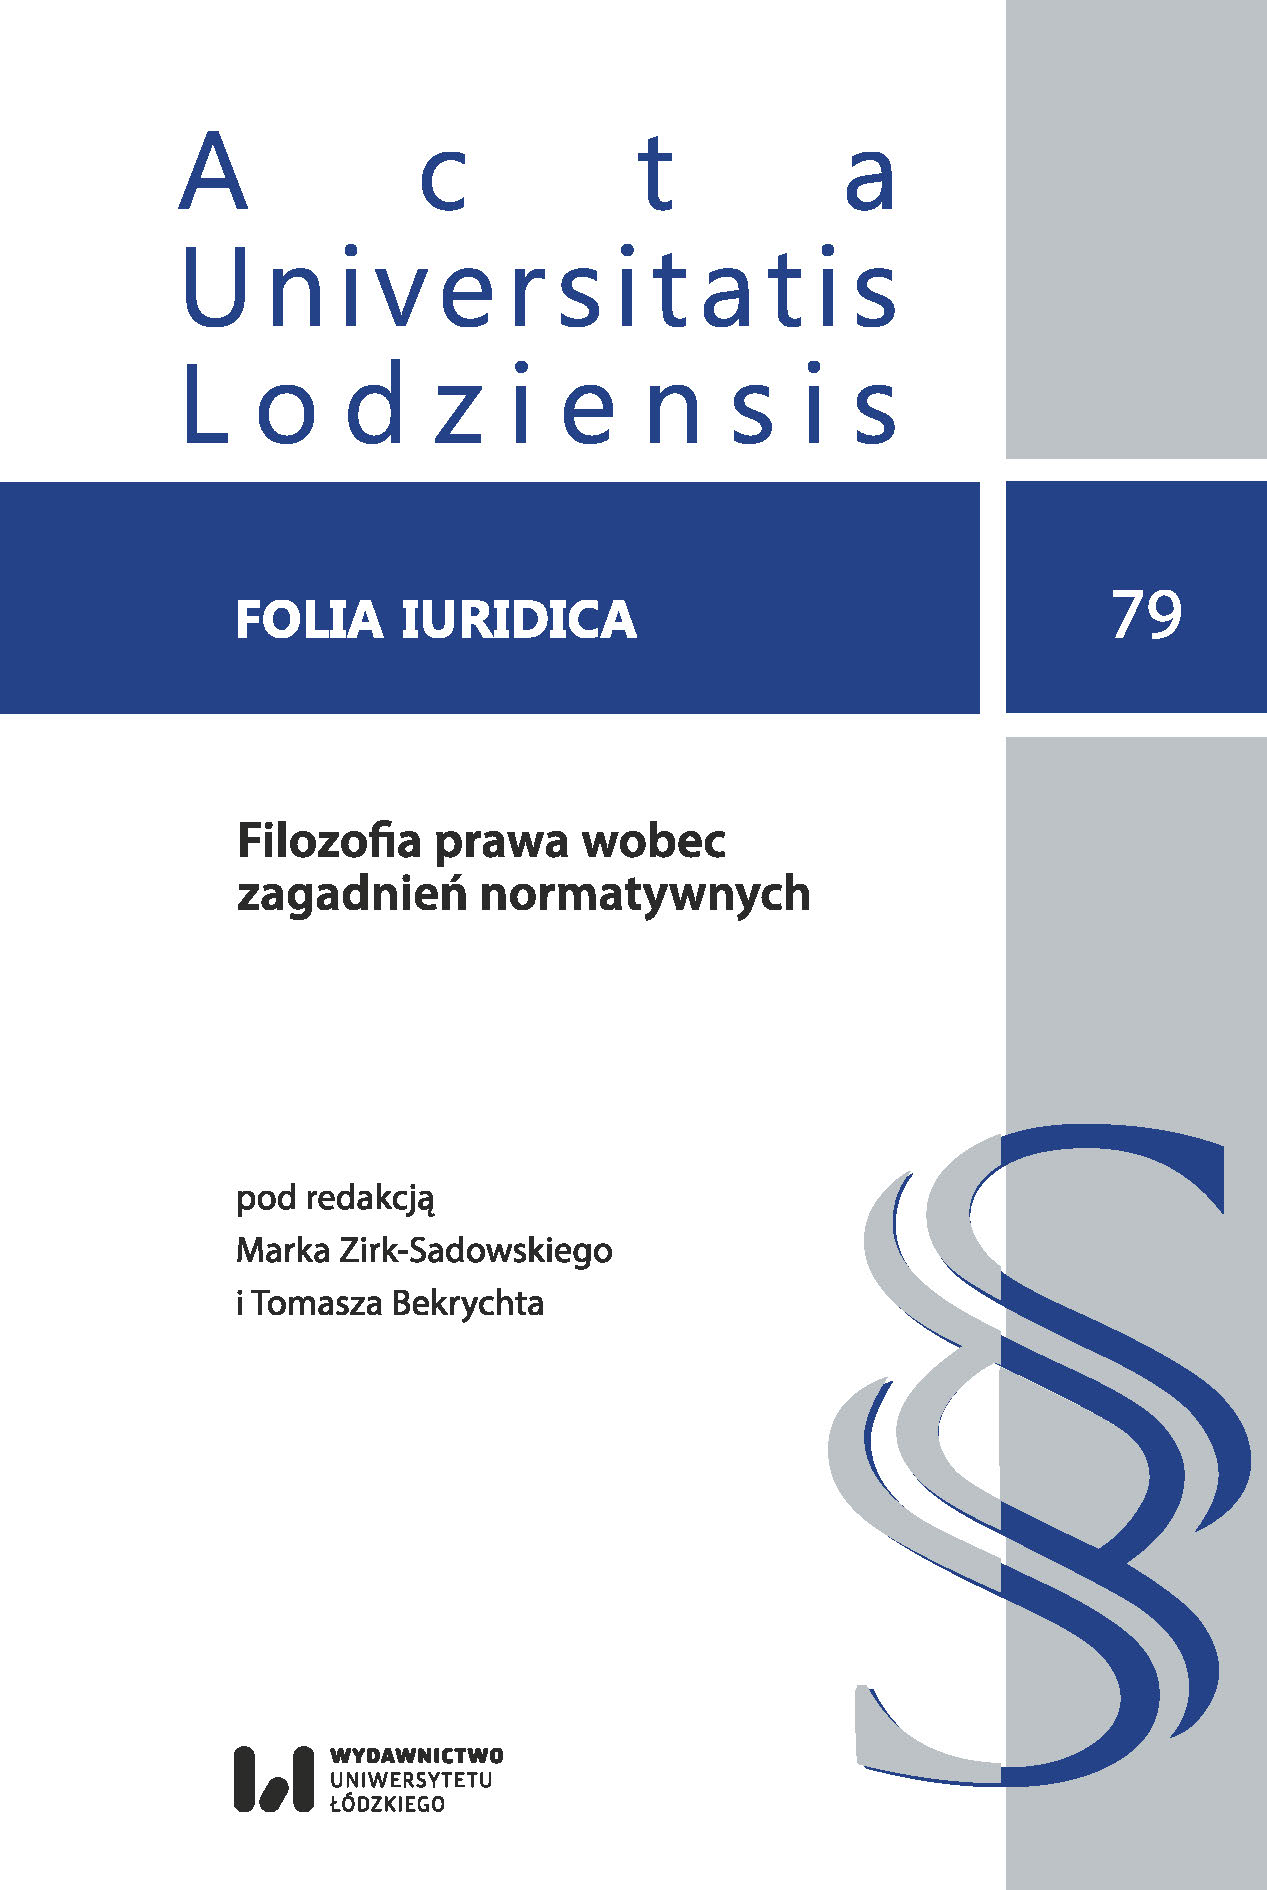 PROSTITUTION AS AN ACT NOT SUBJECT TO TAXATION
IN POLISH LAW Cover Image